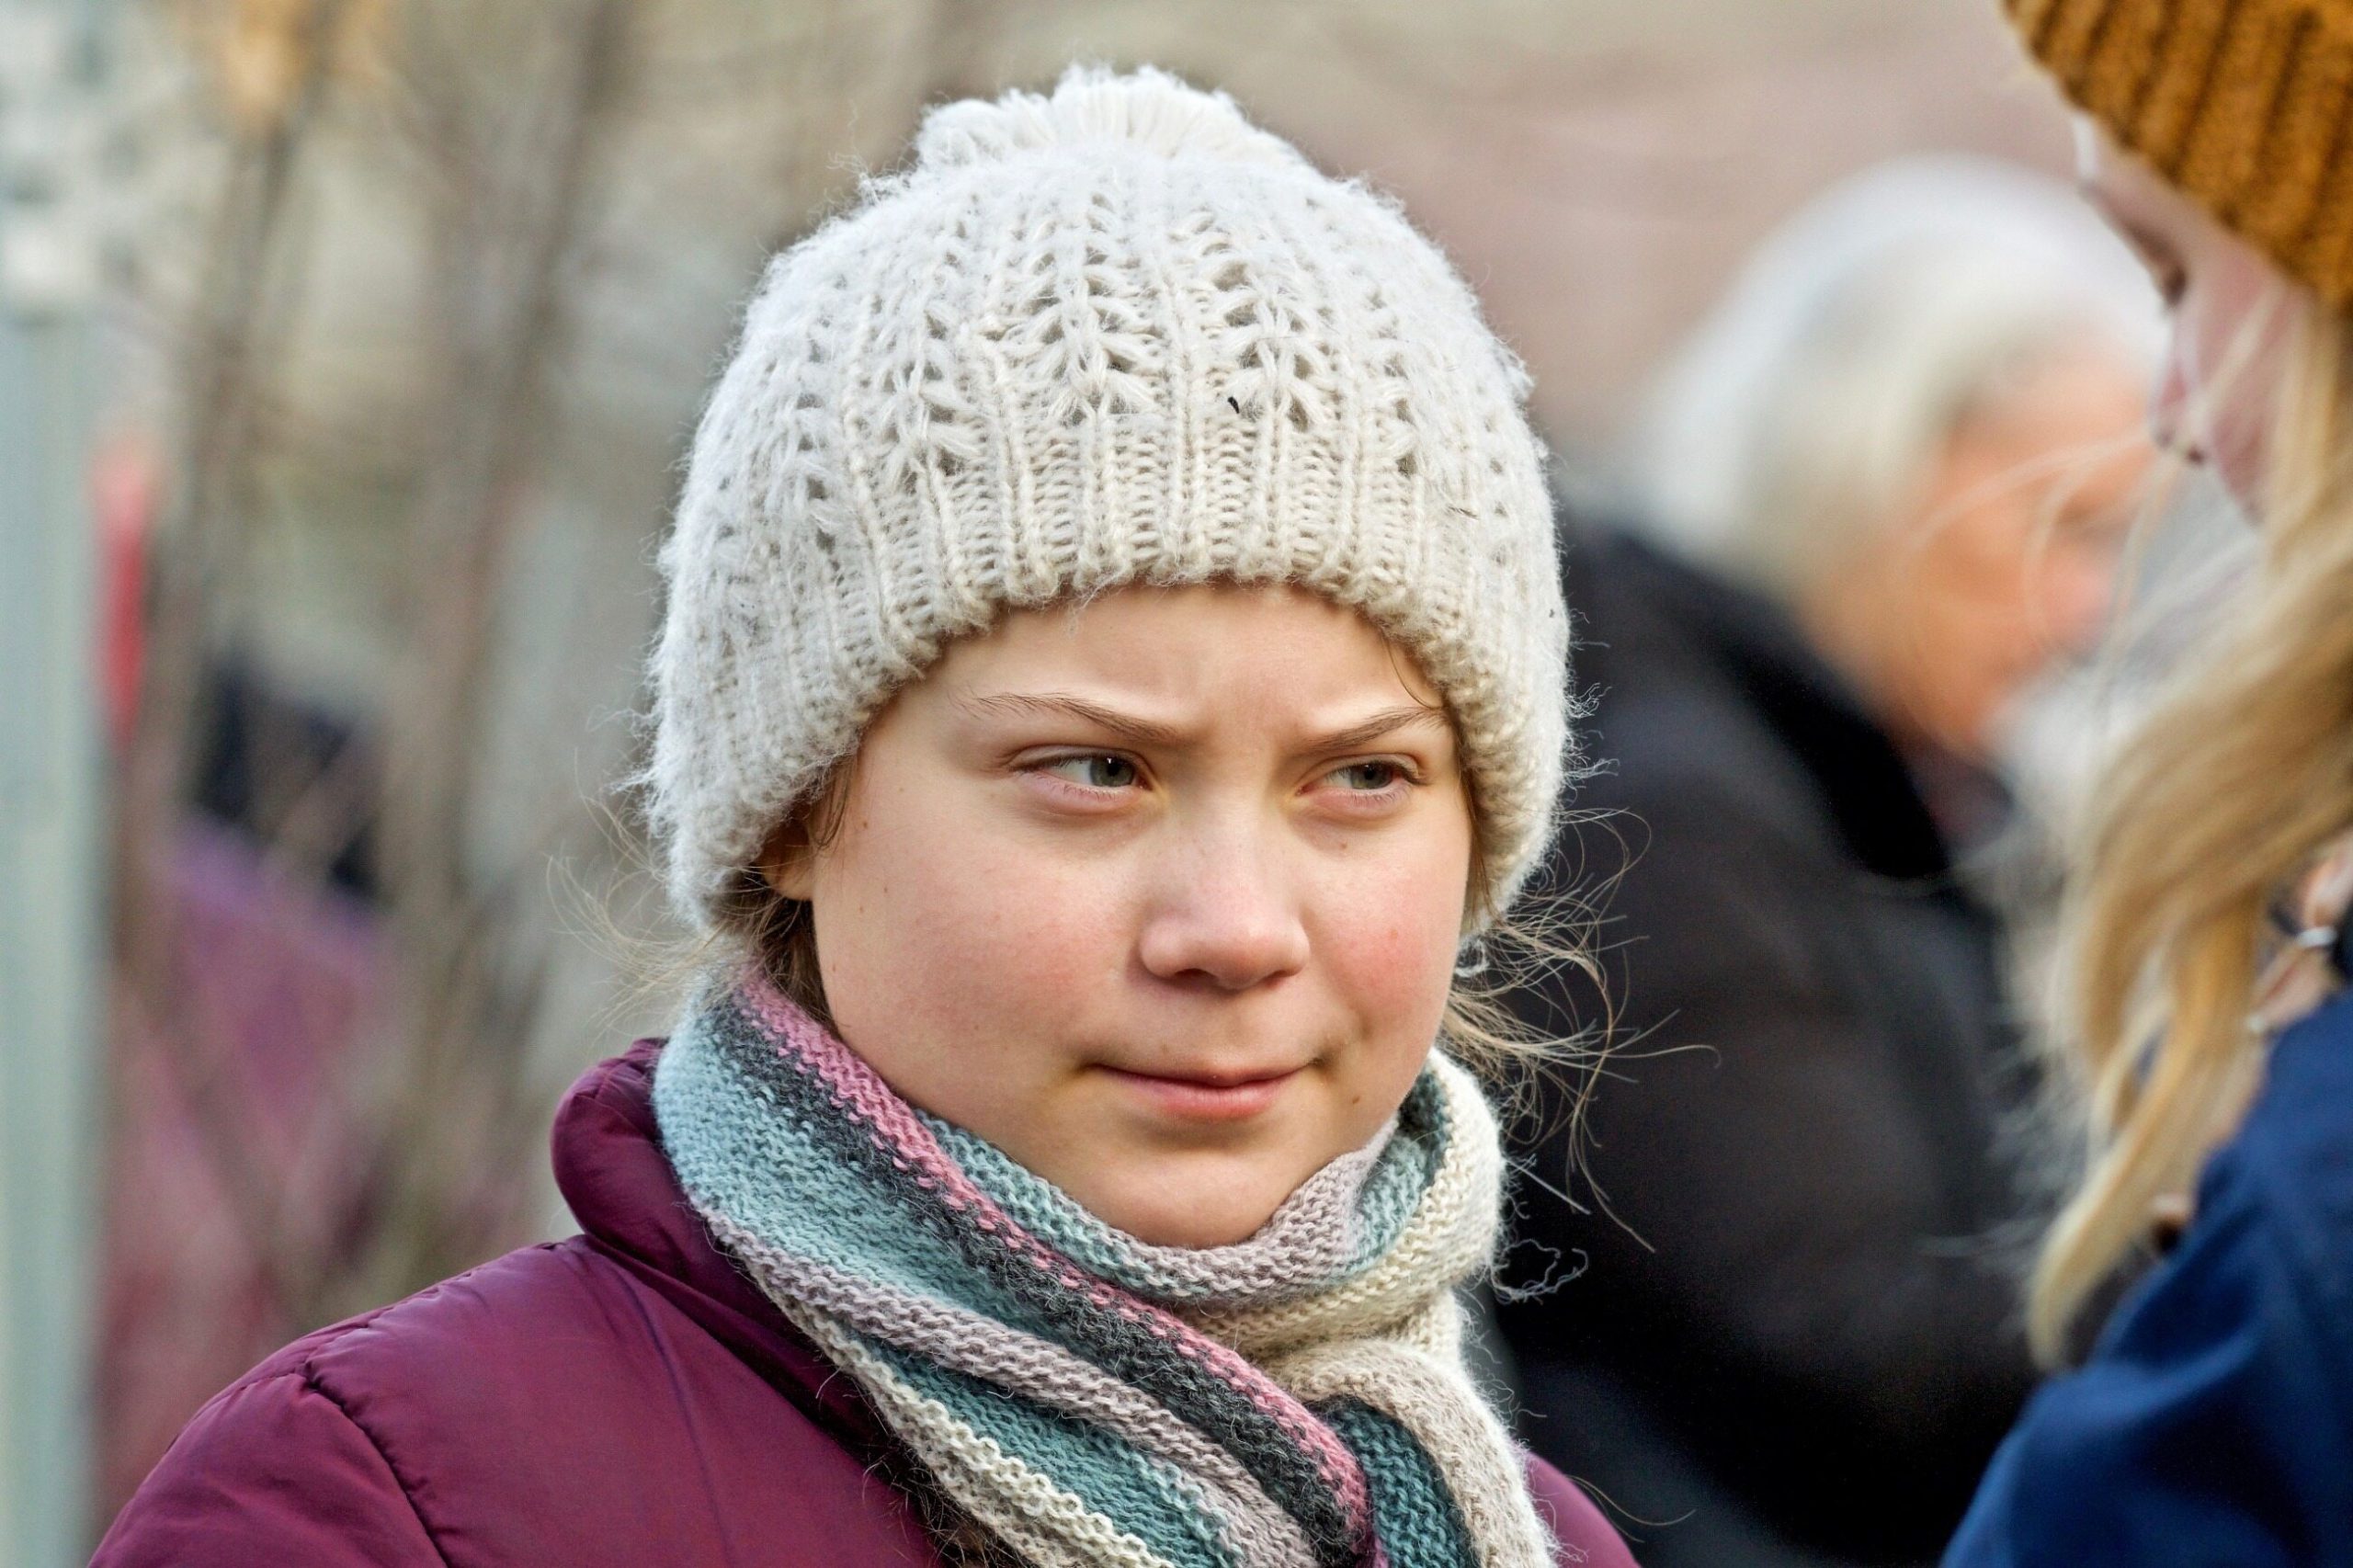 Greta Thunberg may have serious problems.  She was accused of recidivism